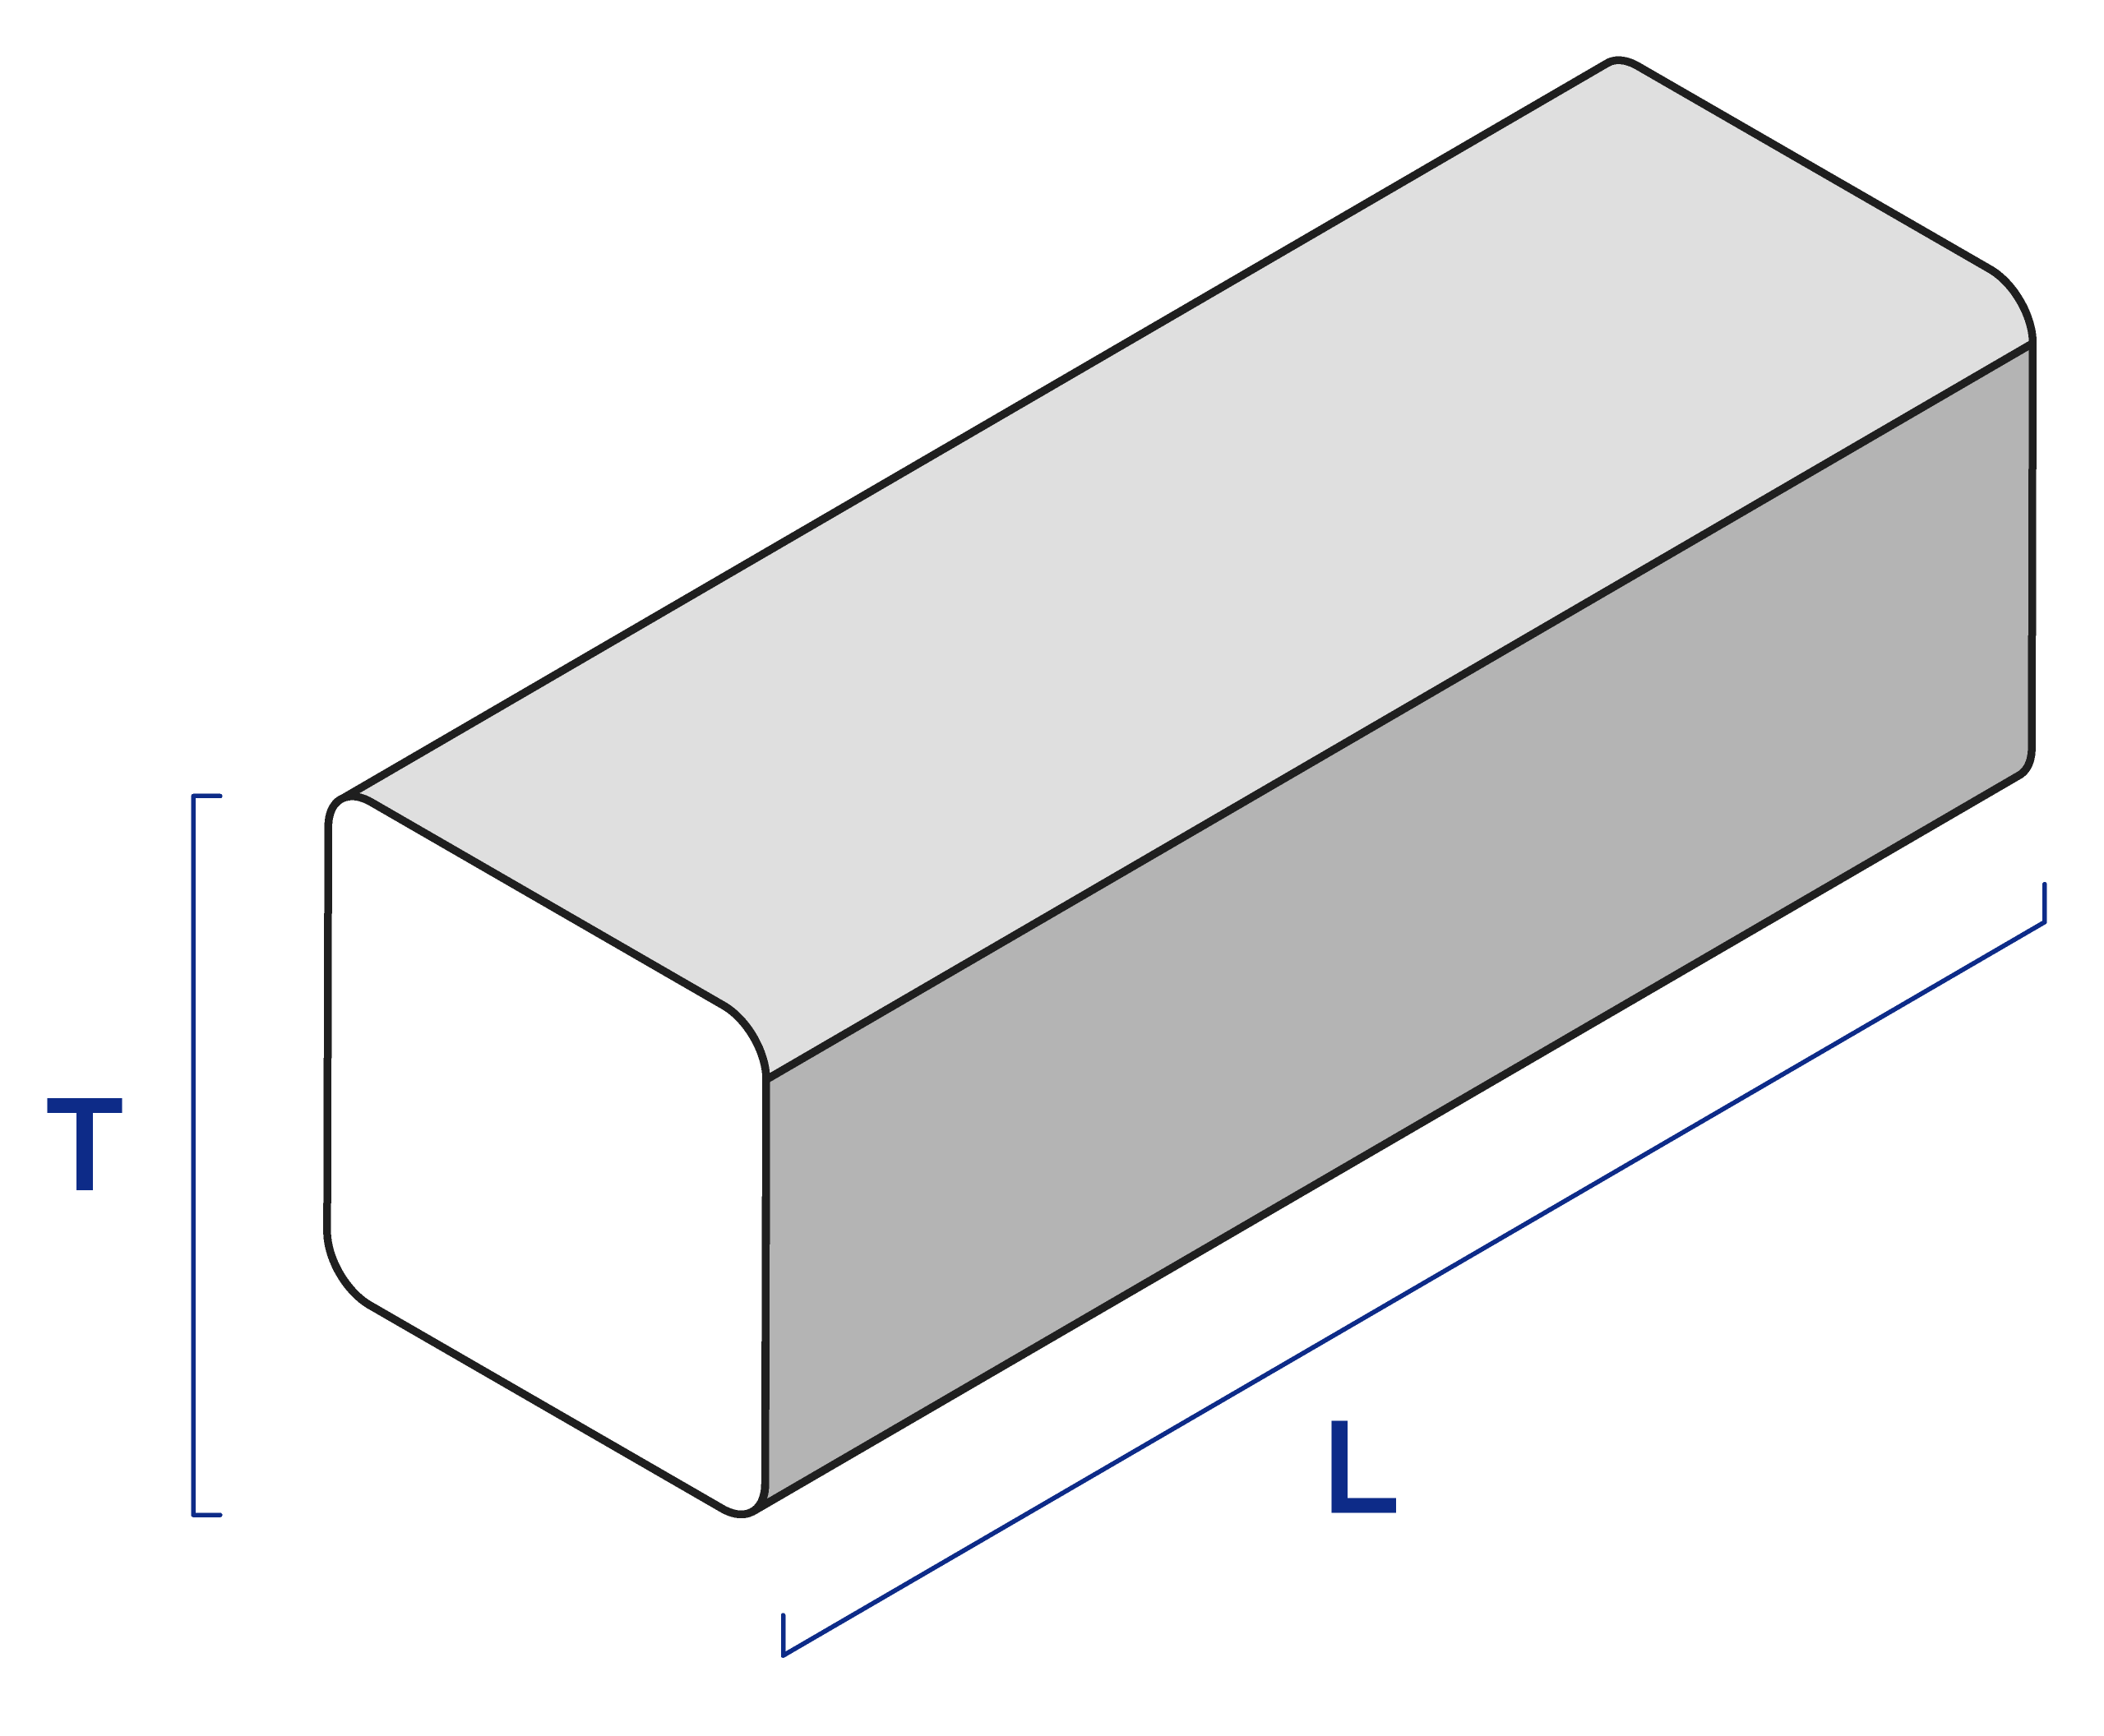 Diagram that shows how to measure a square bar